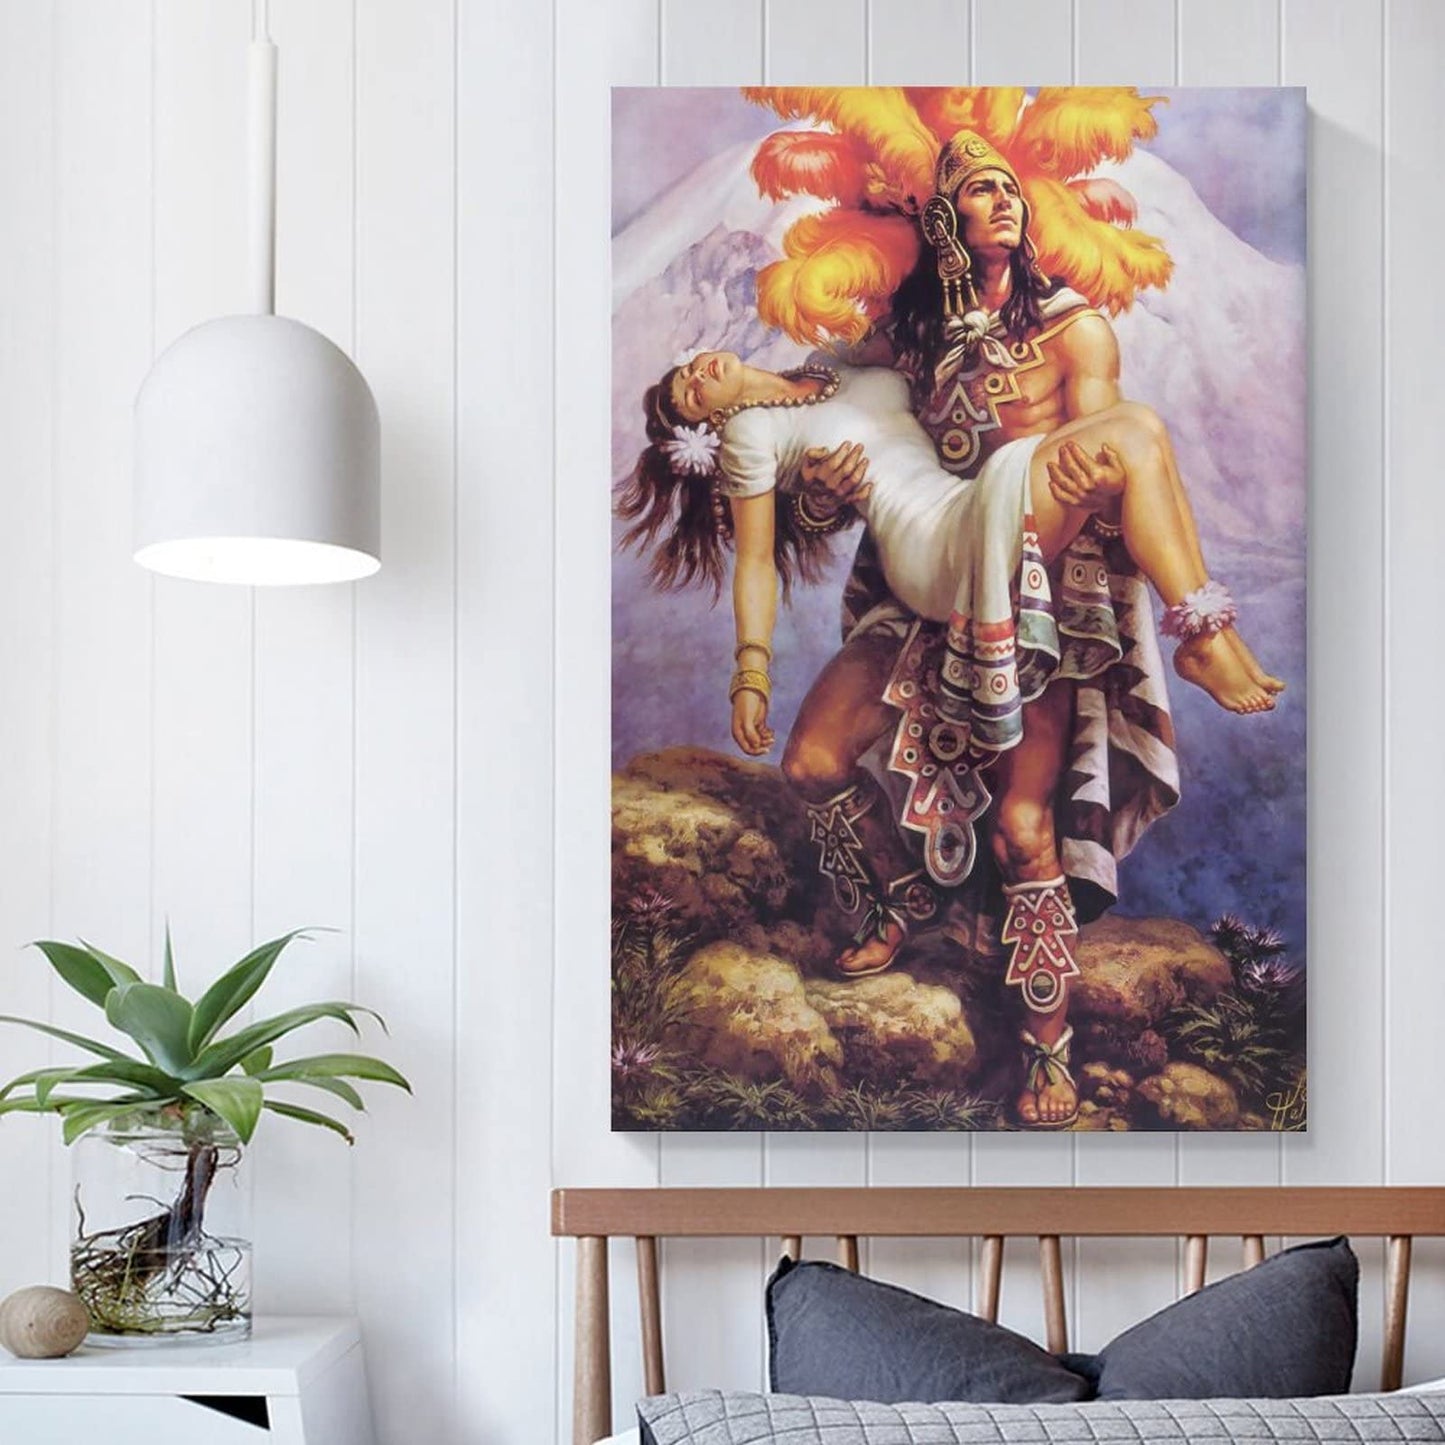 Aztec Warrior and Princess Poster Mexican Folk Mythology Canvas Wall Art Decorative Painting Living Room Decor Posters Bedroom Prints 08x12inch(20x30cm), Unframed